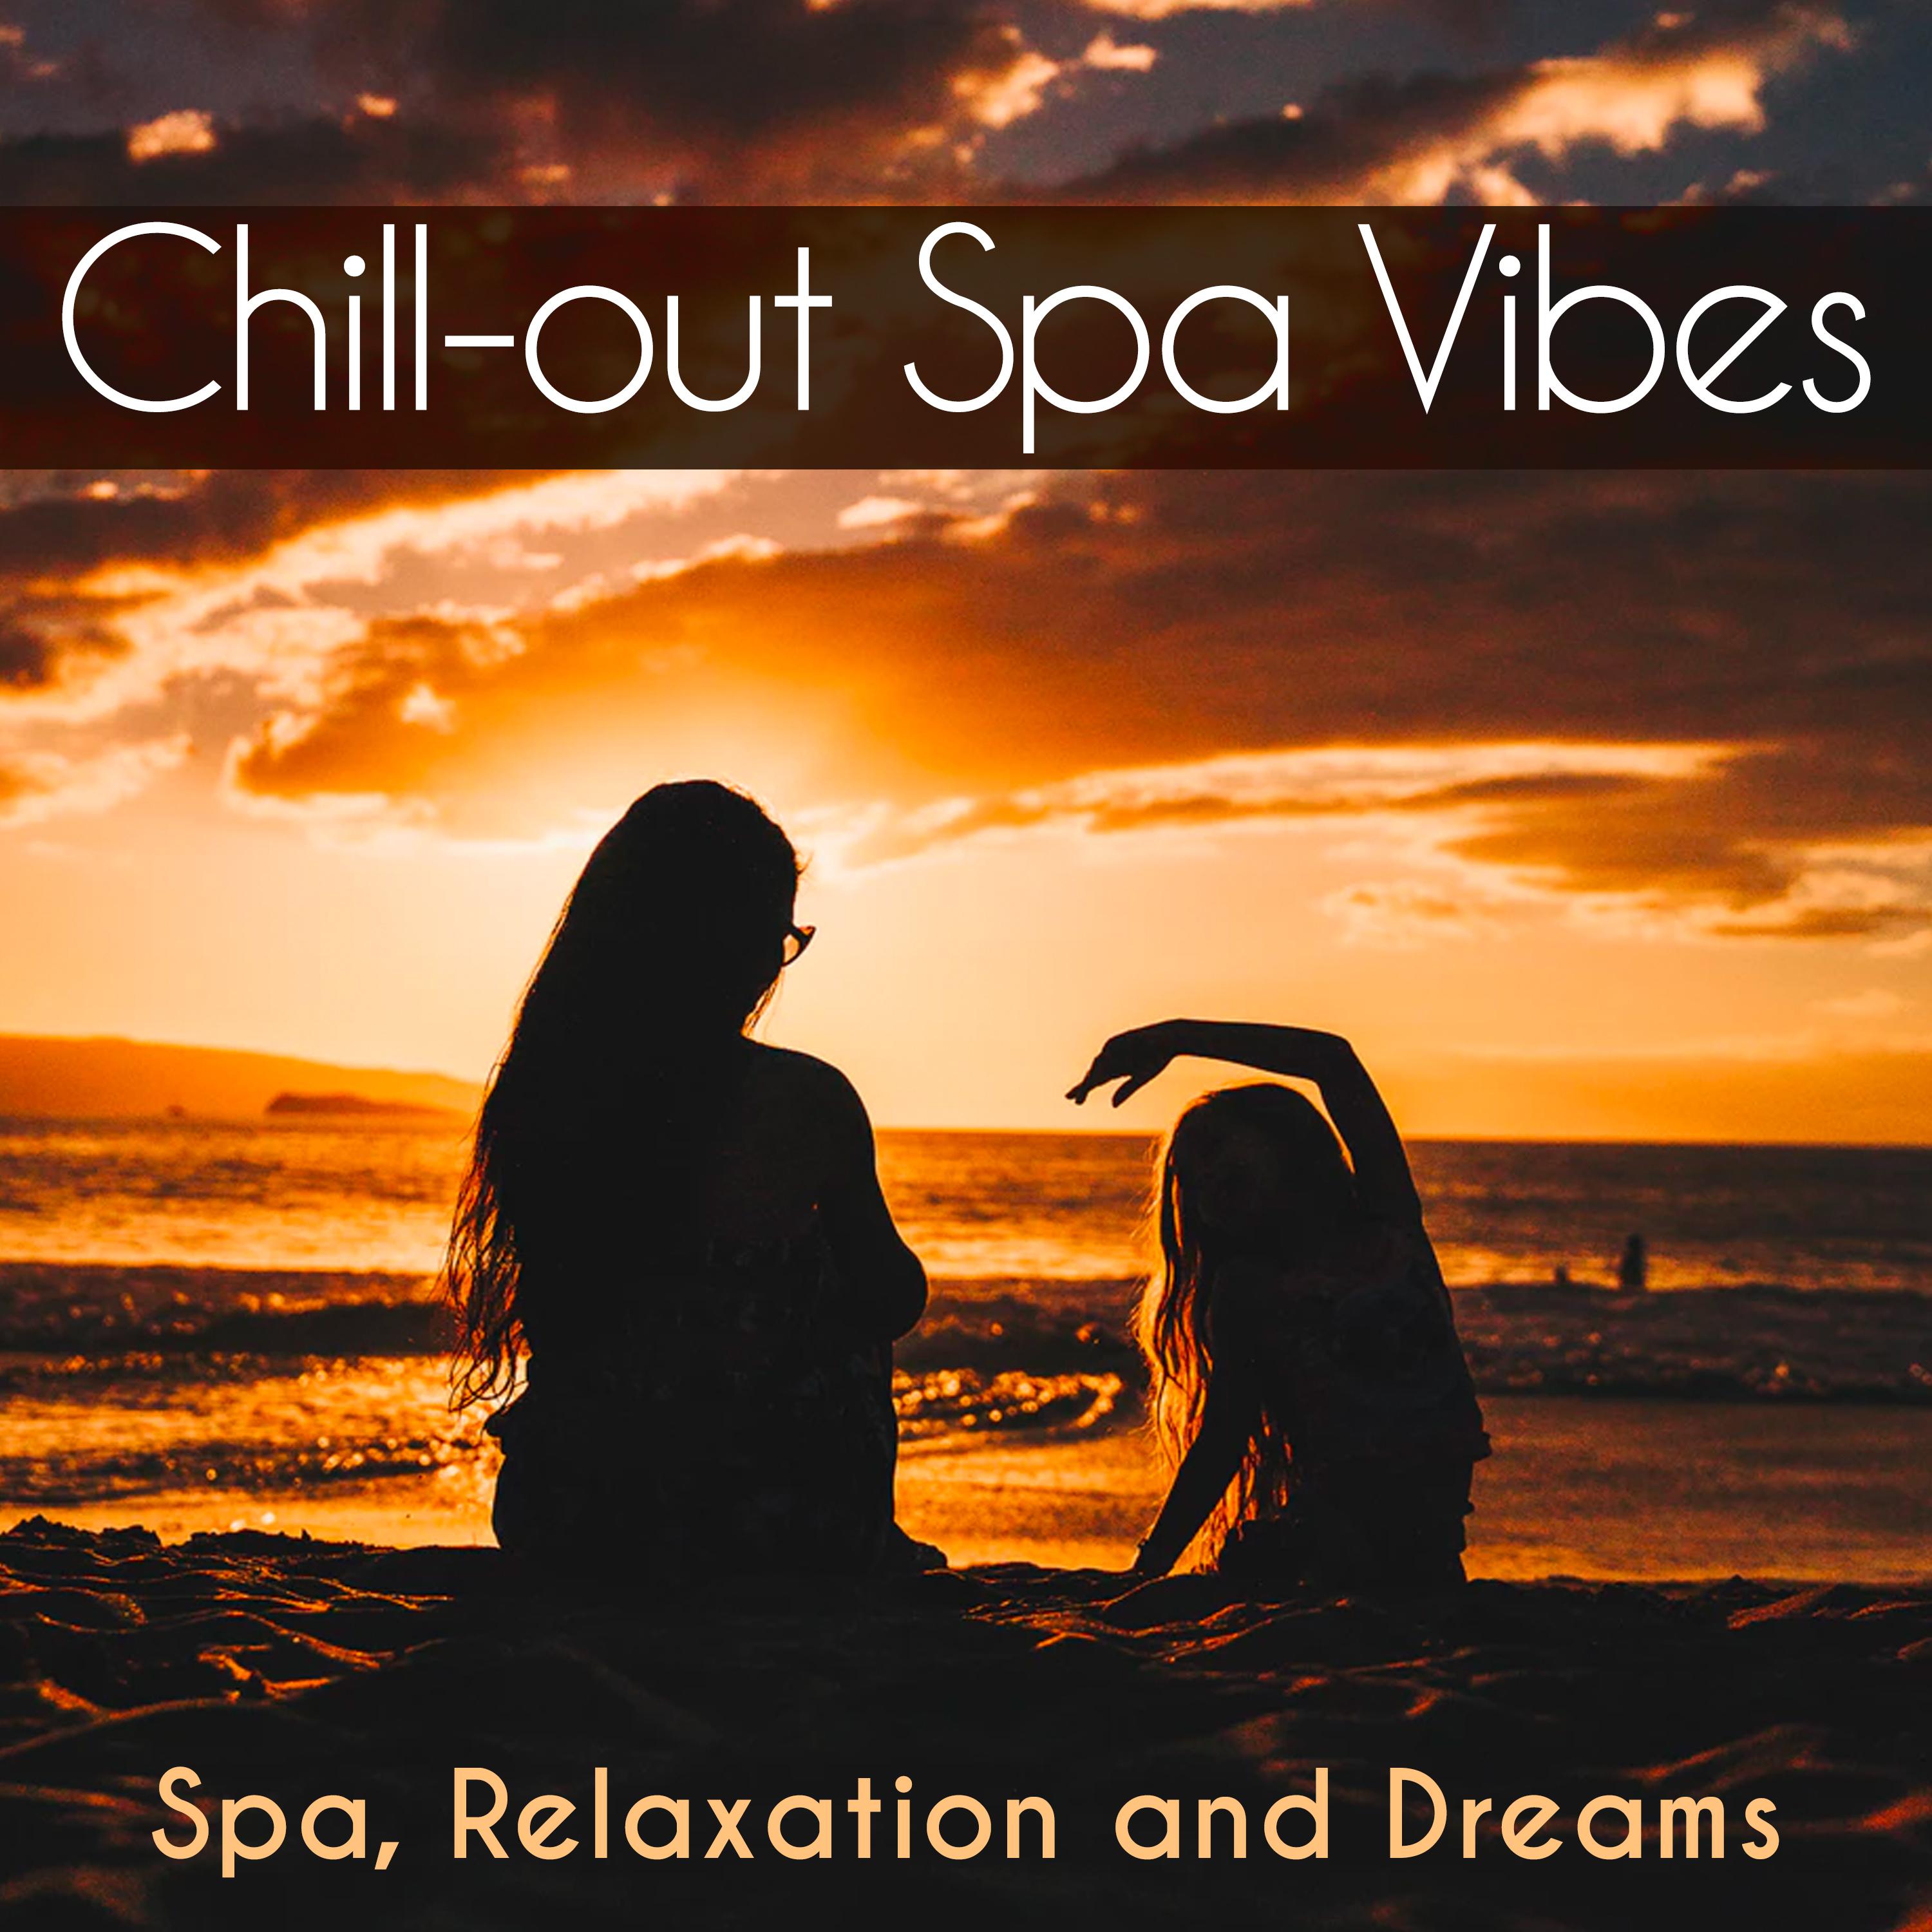 Chill-out Spa Vibes